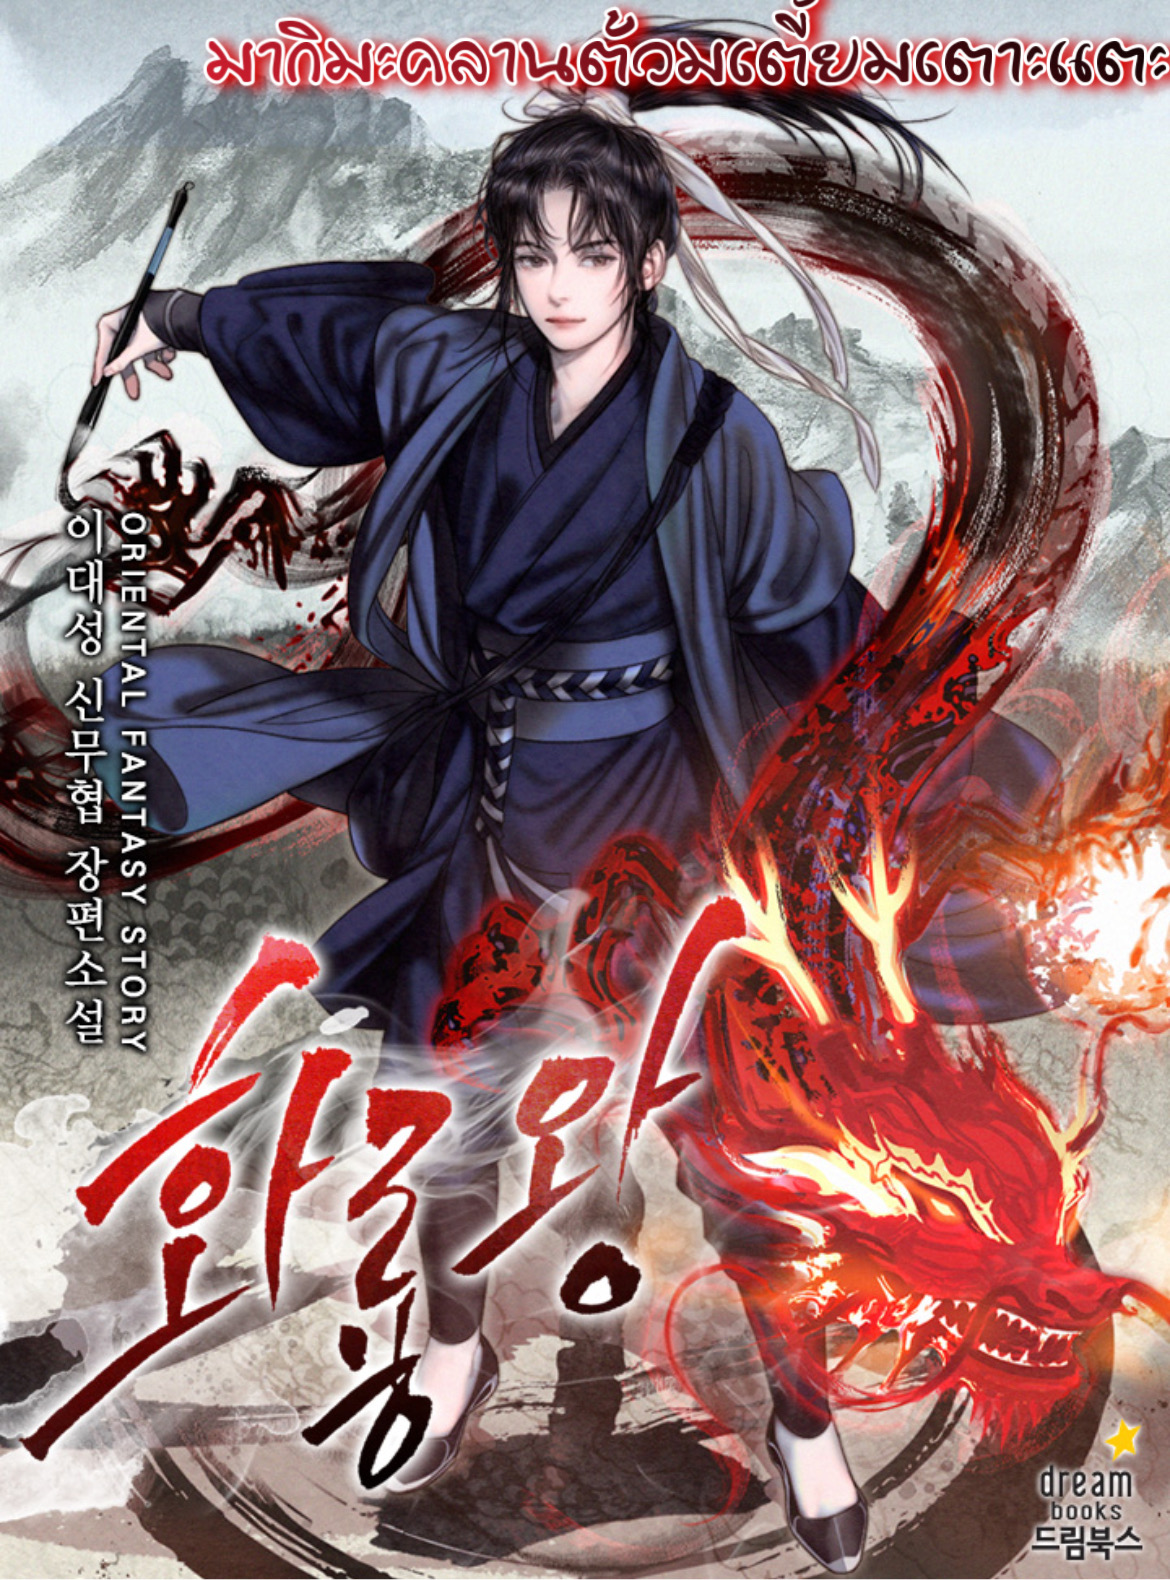 King of Fire Dragon 16 (7)